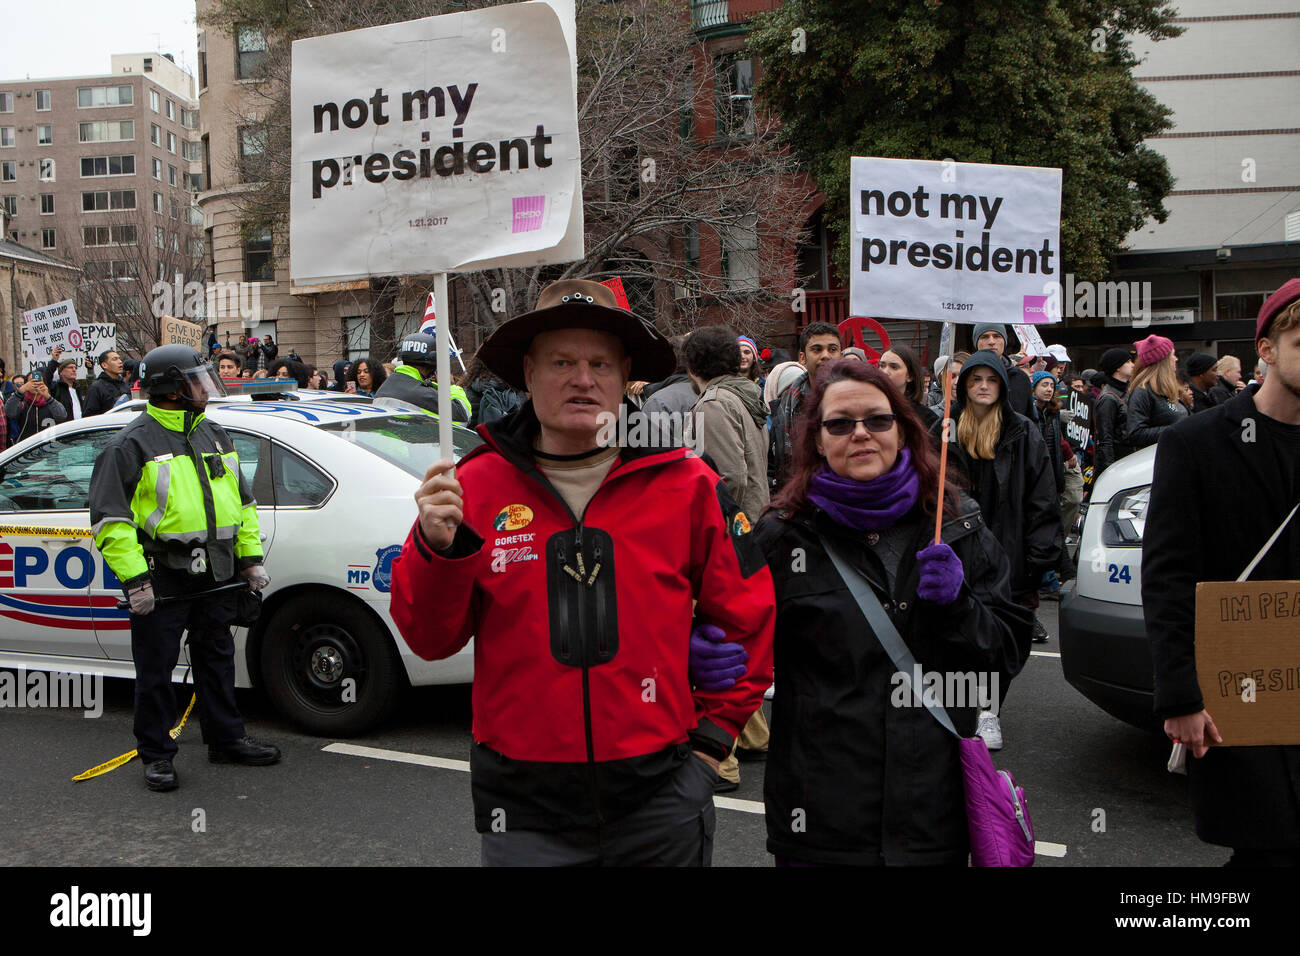 Anti-Trump activists holding sign which read 'Not My President' during the 2017 presidential inauguration protests - Washington, DC UsA Stock Photo